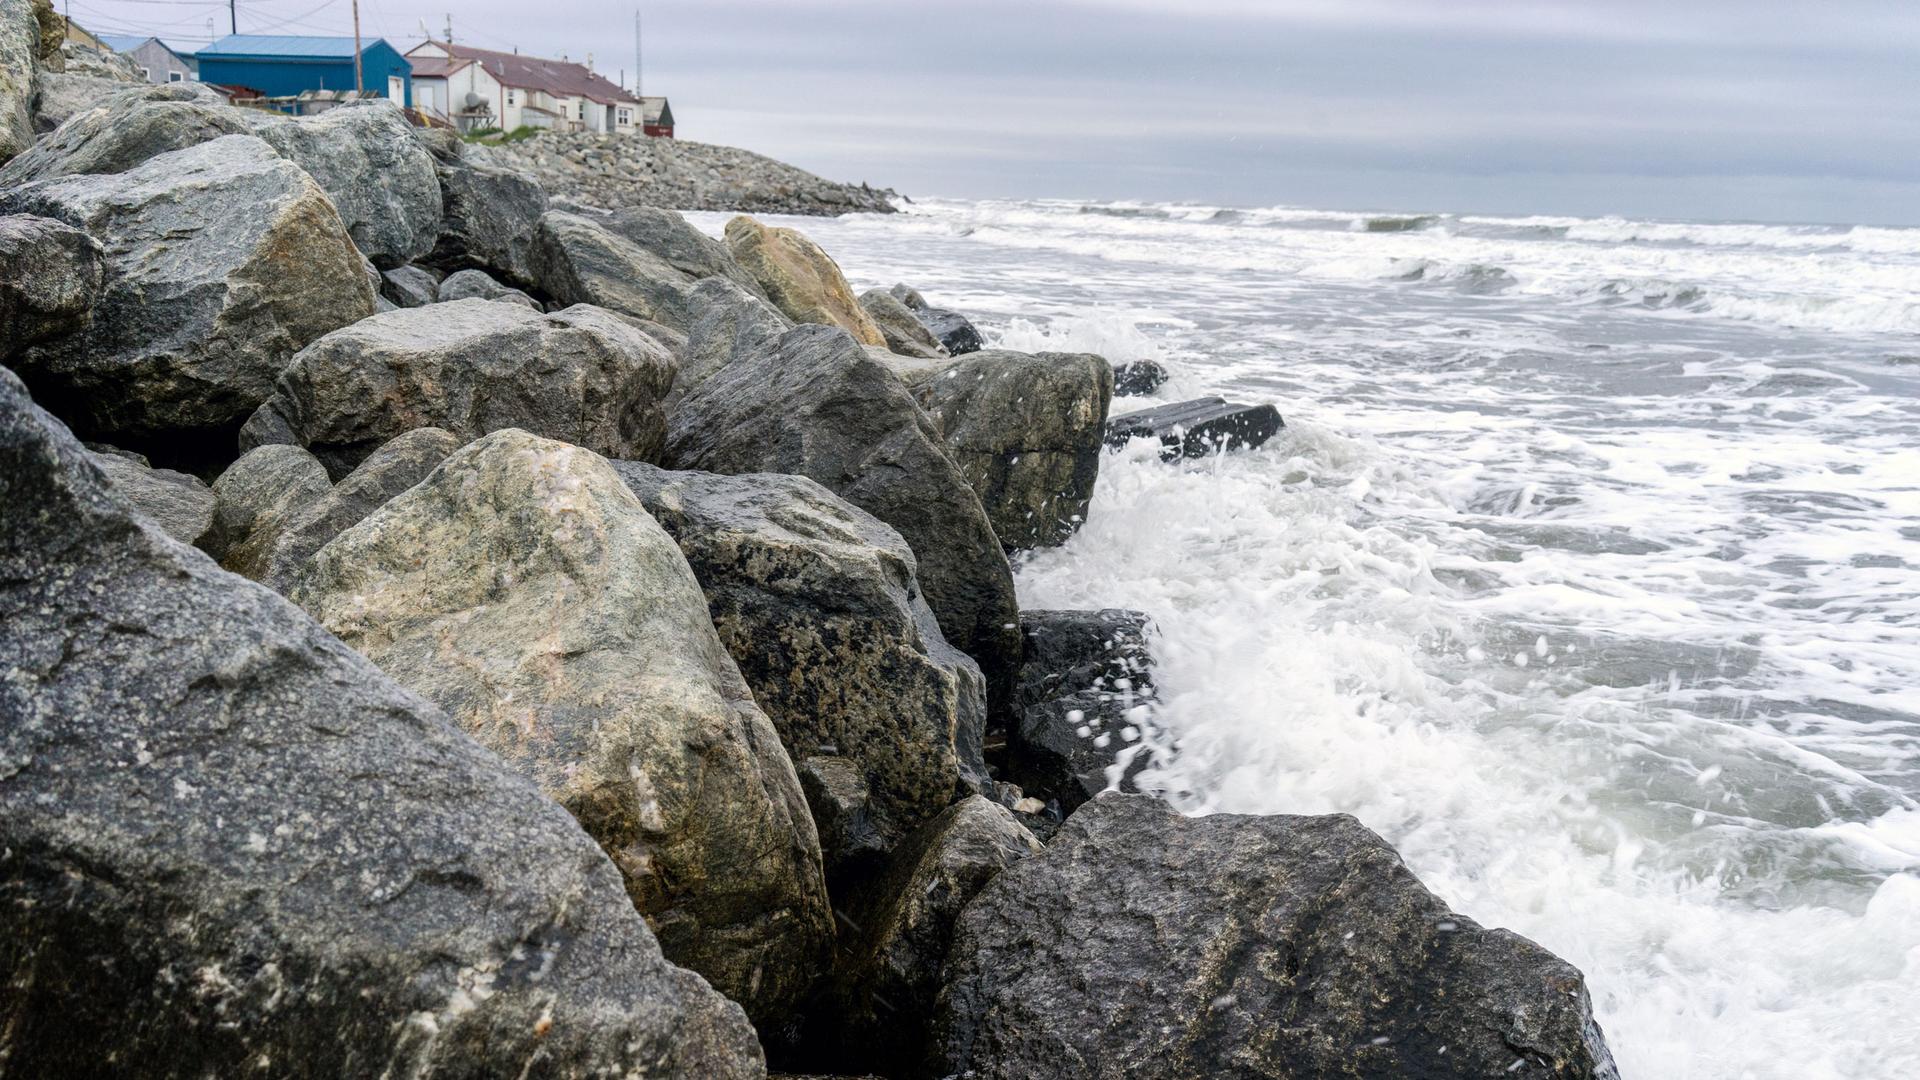 Waves crash into rocks. A house stands in the background.